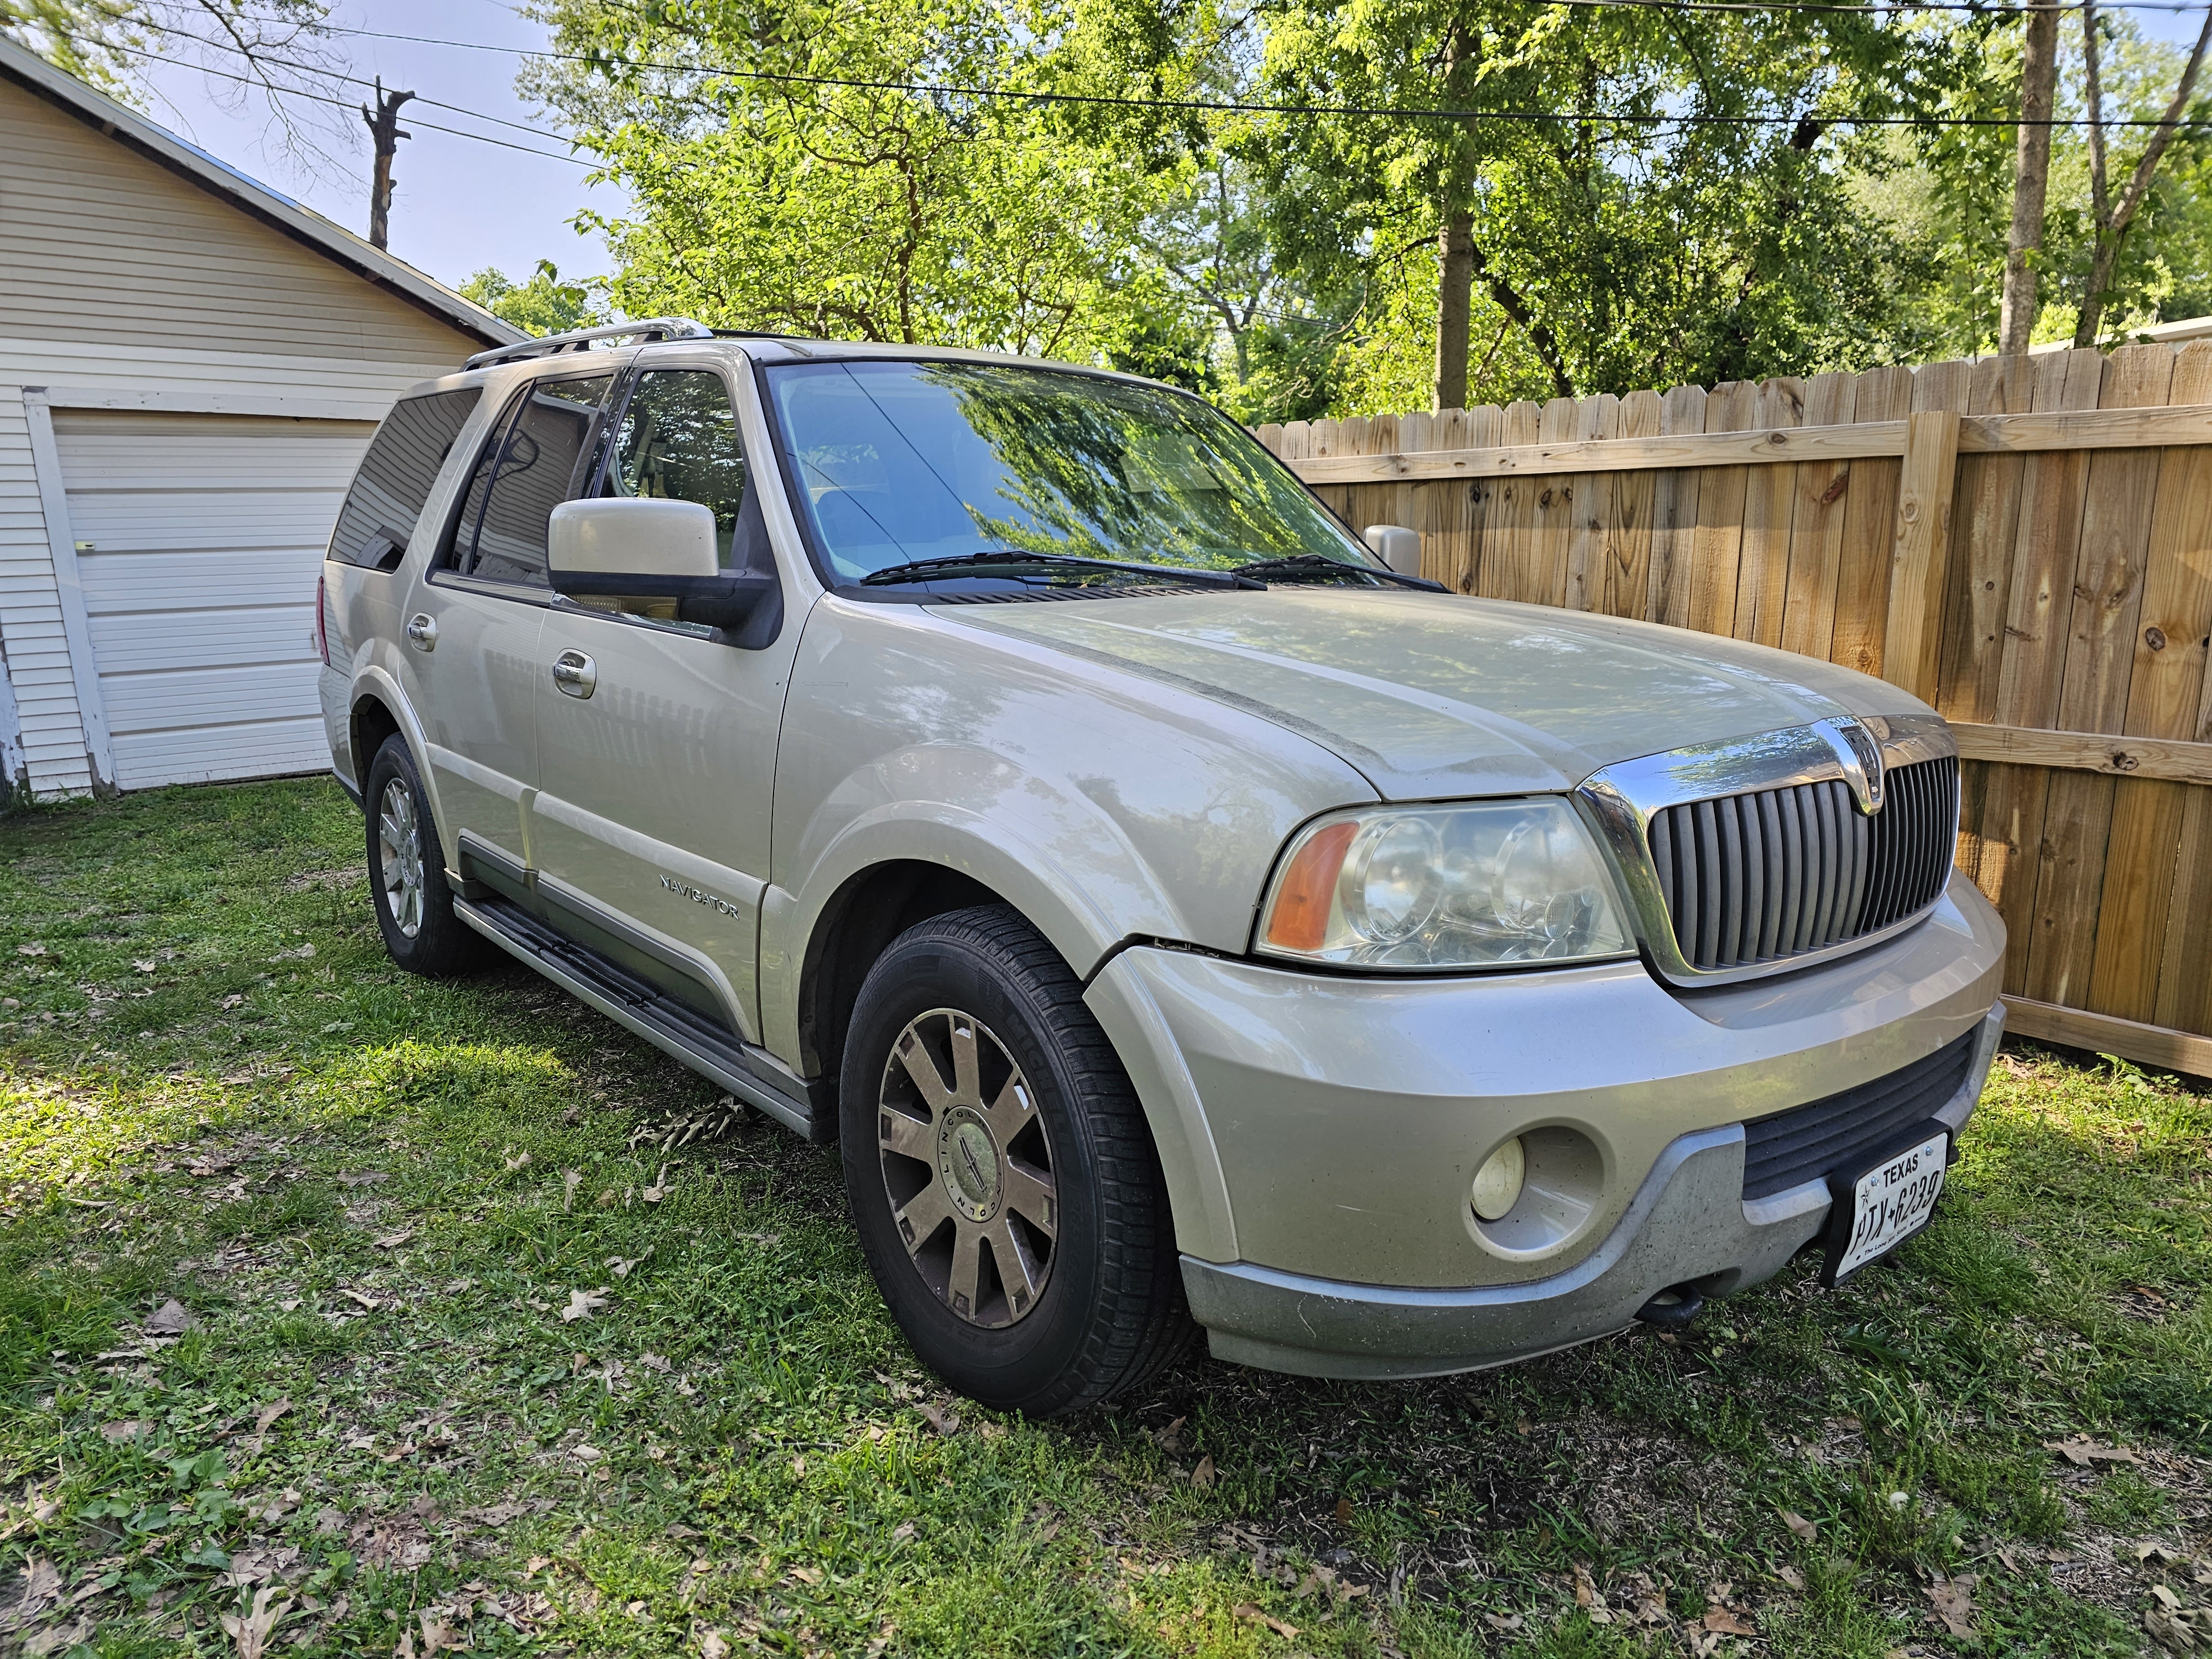 Used 2004 Lincoln Navigator for Sale Near Me | Cars.com